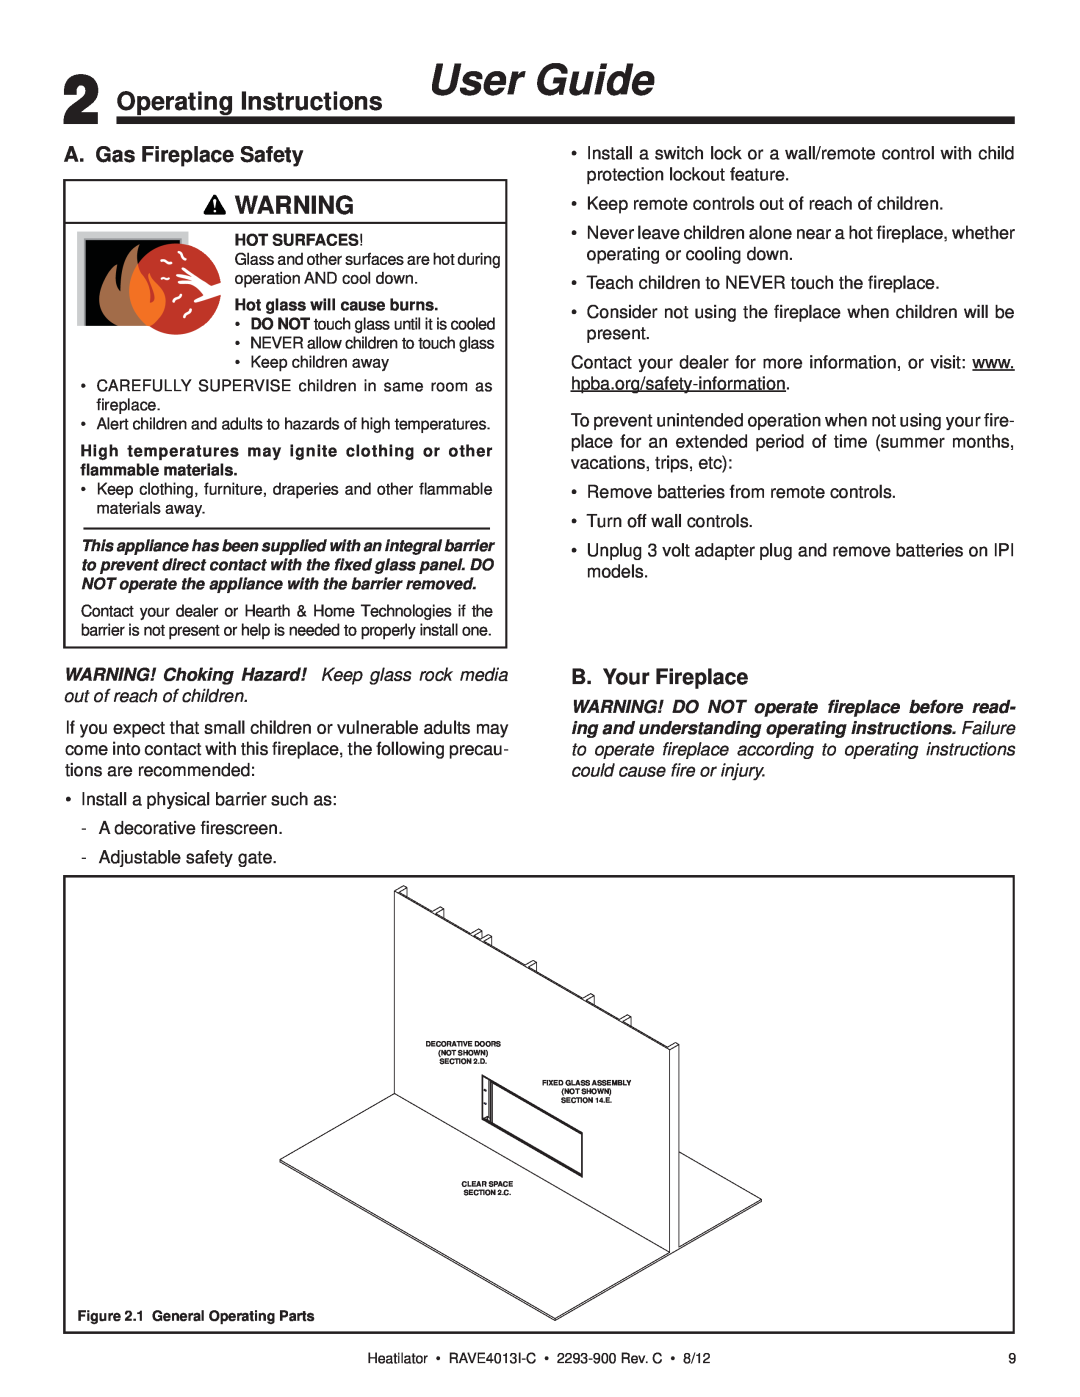 Heatiator Rave4013i-c owner manual Operating Instructions User Guide, A. Gas Fireplace Safety, B. Your Fireplace 